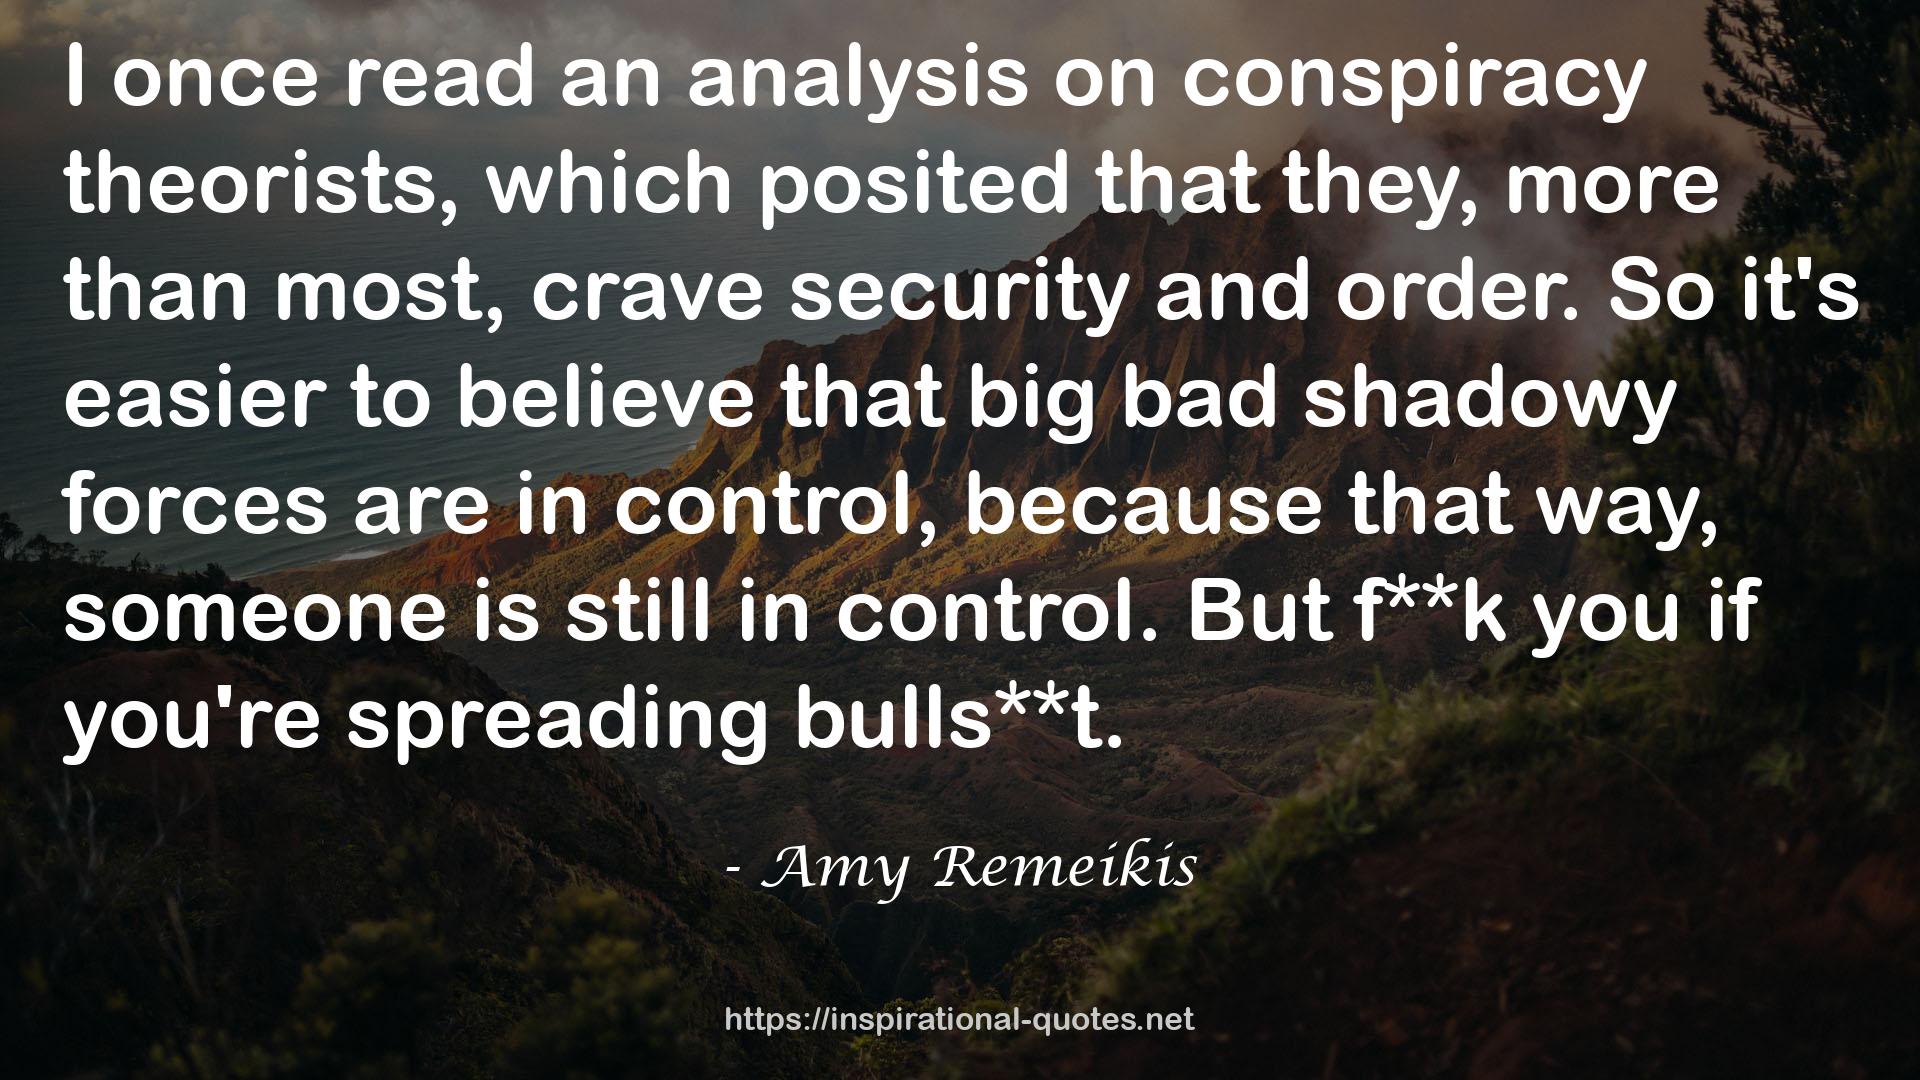 Amy Remeikis QUOTES